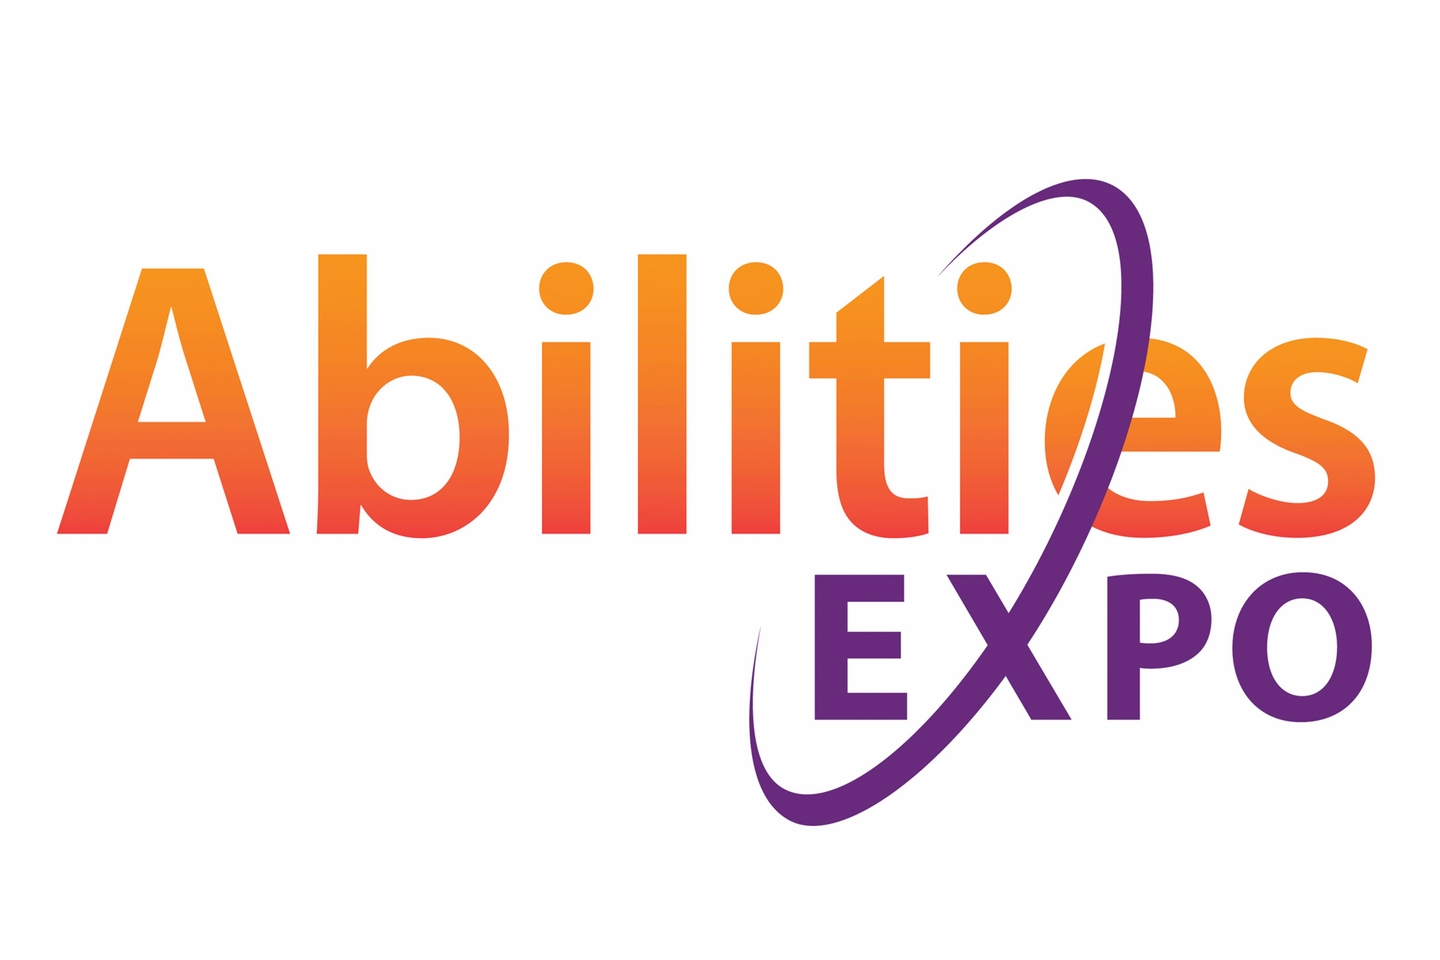 An image of the following words in orange and purple colors, Abilities Expo. There is an incomplete disc running through and around the words.